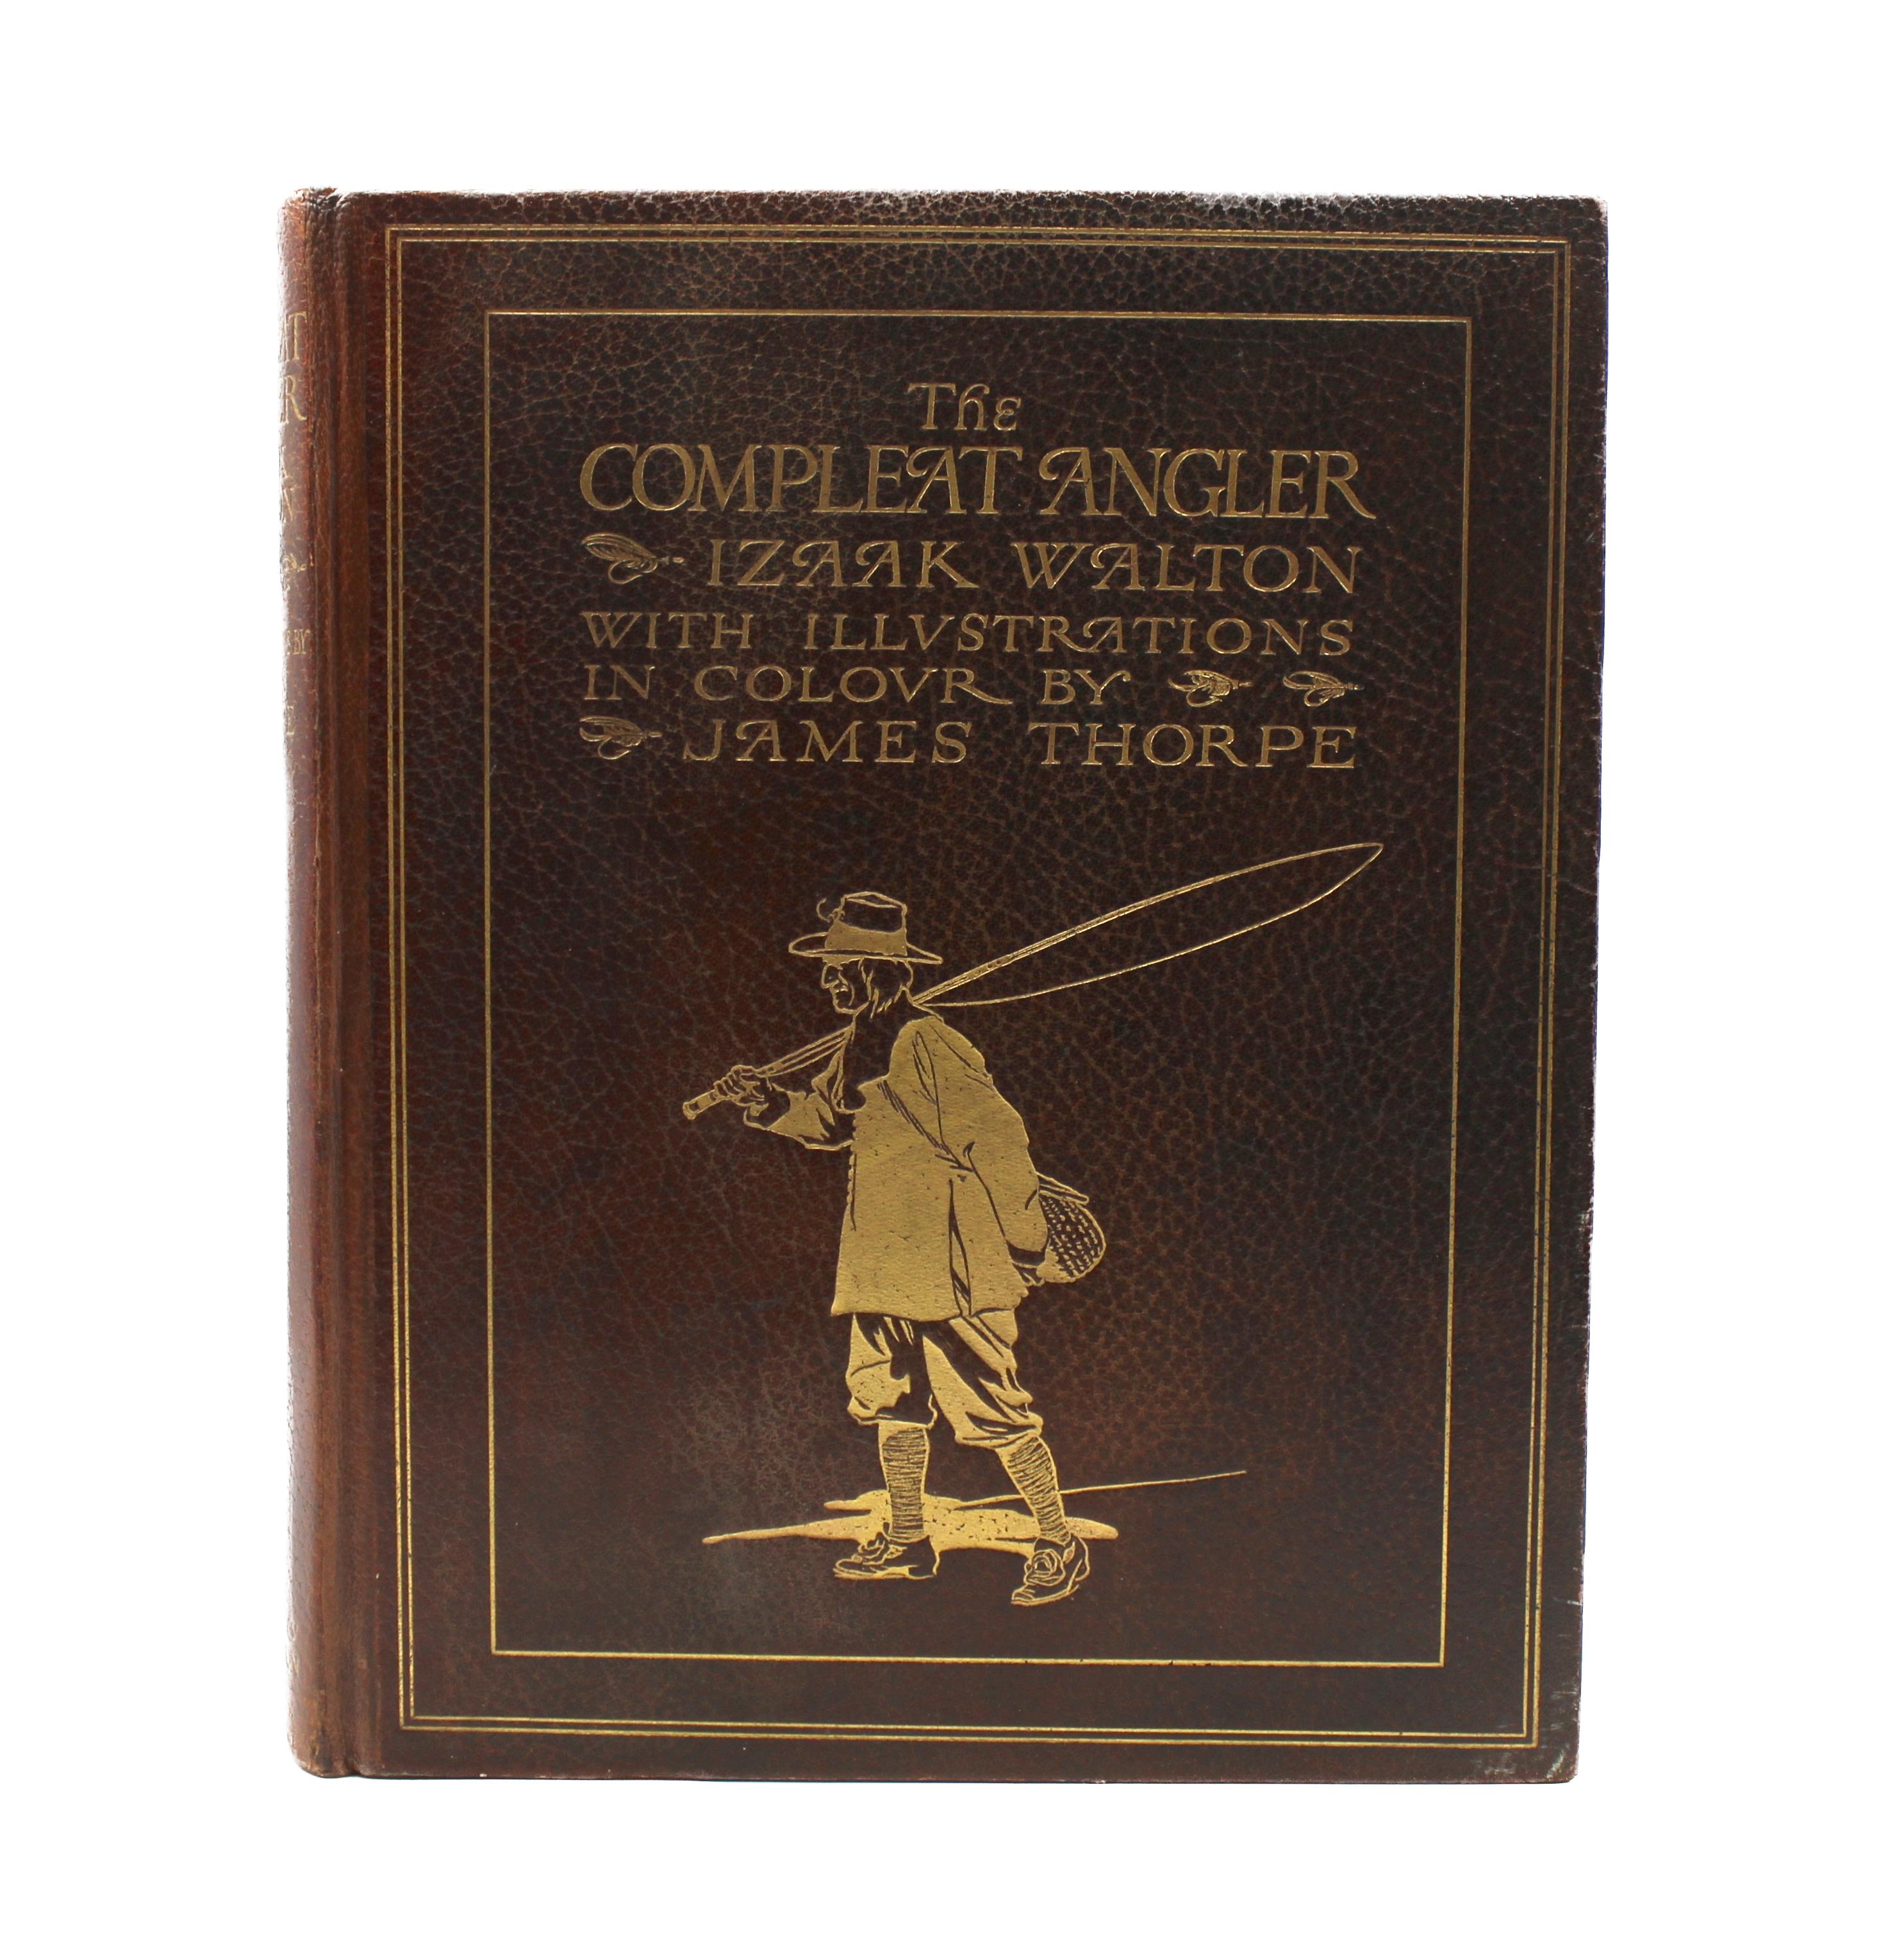 The Compleat Angler by Izaak Walton, Illustrated and Signed by James Thorpe, First Thorpe Edition, Edition de Luxe 99/250, 1911

Walton, Izaak. The Compleat Angler or the Contemplative Man’s Recreation… London, New York, and Toronto: Hodder &